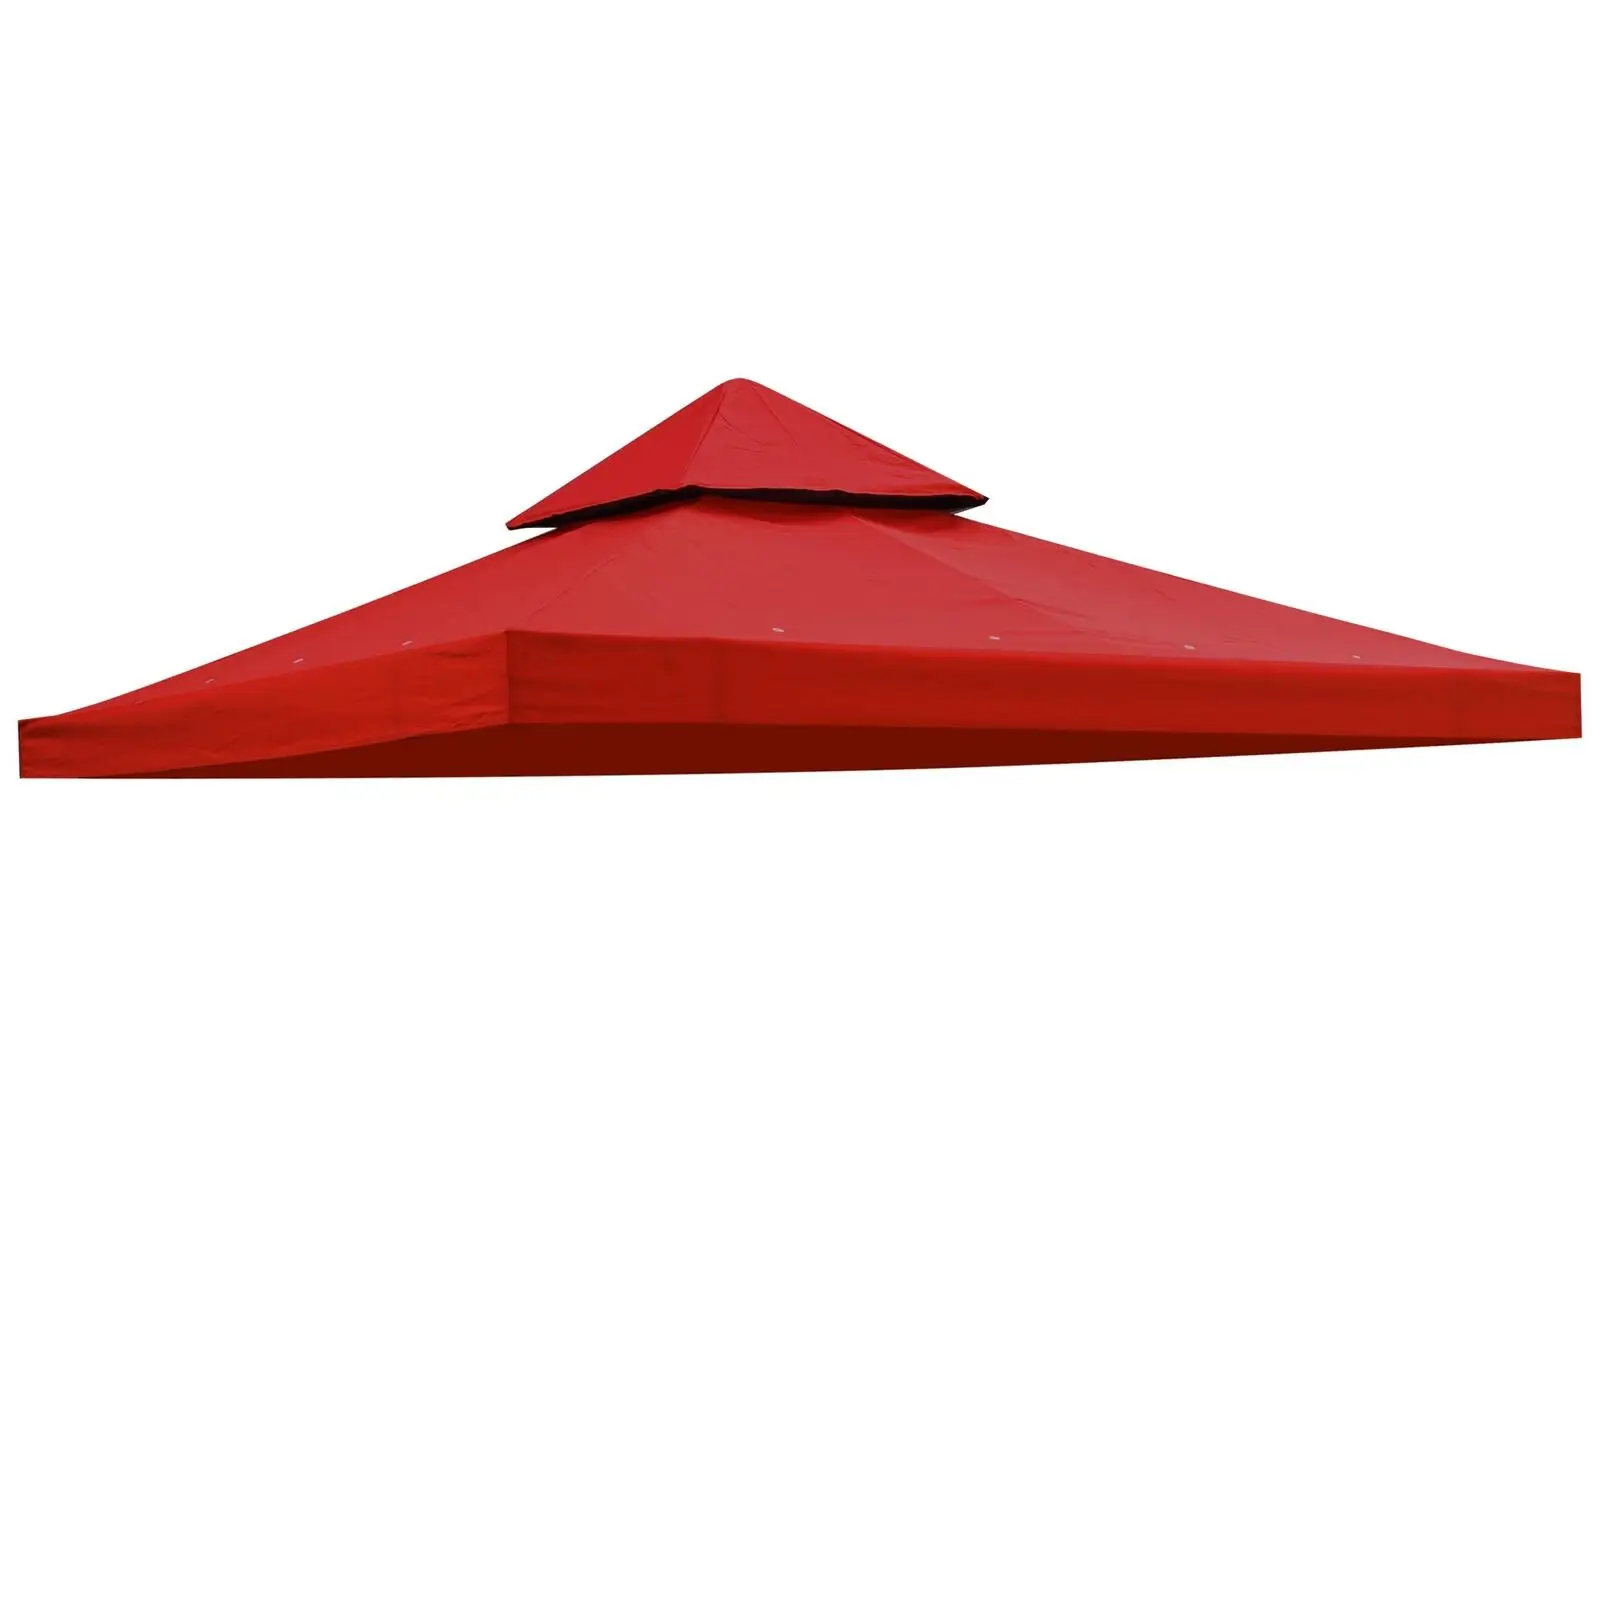 

9.76ft X 9.76ft 2-tier Tent Top Gazebo Canopy Replacement UV30+ Protection Red